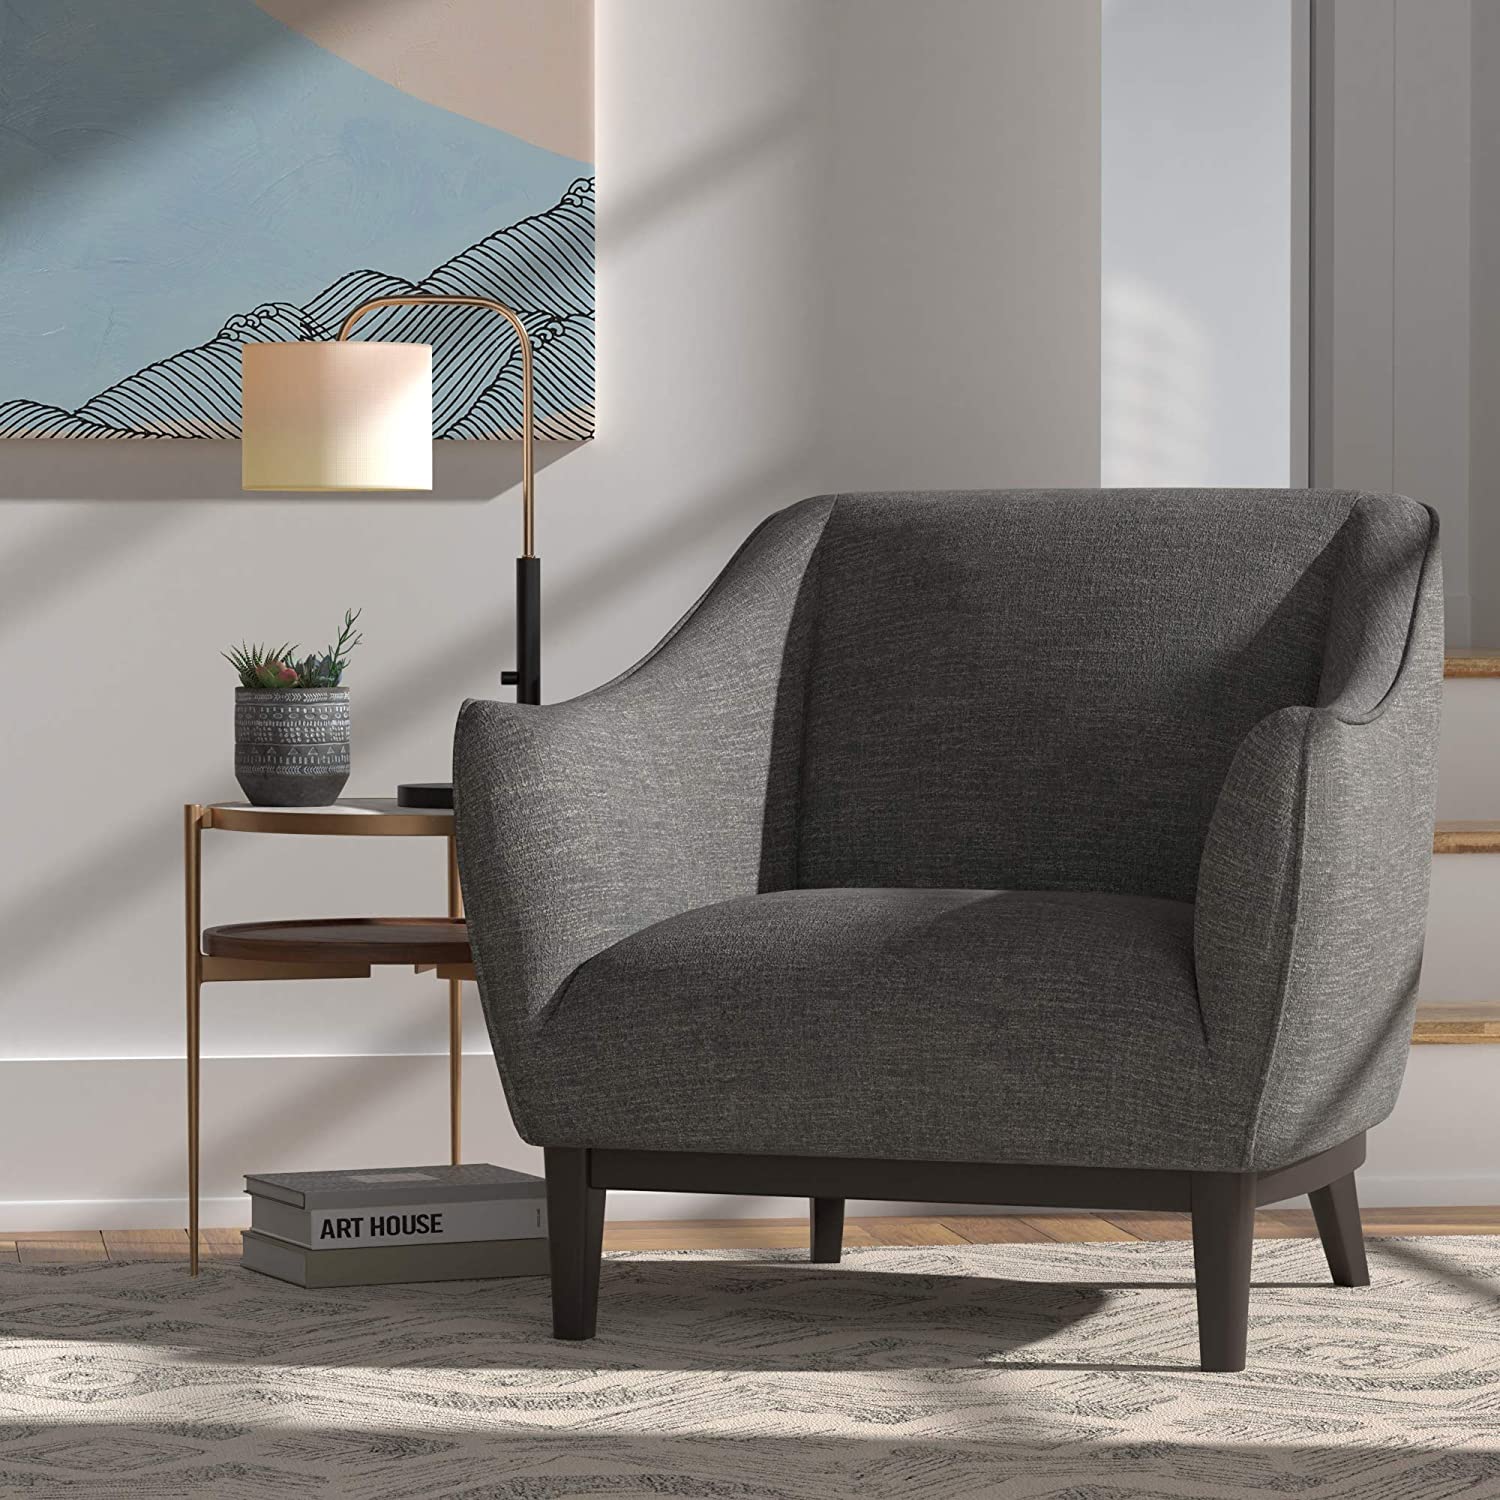 Sofa Chair: Dark Grey Chair with Curved Armrests